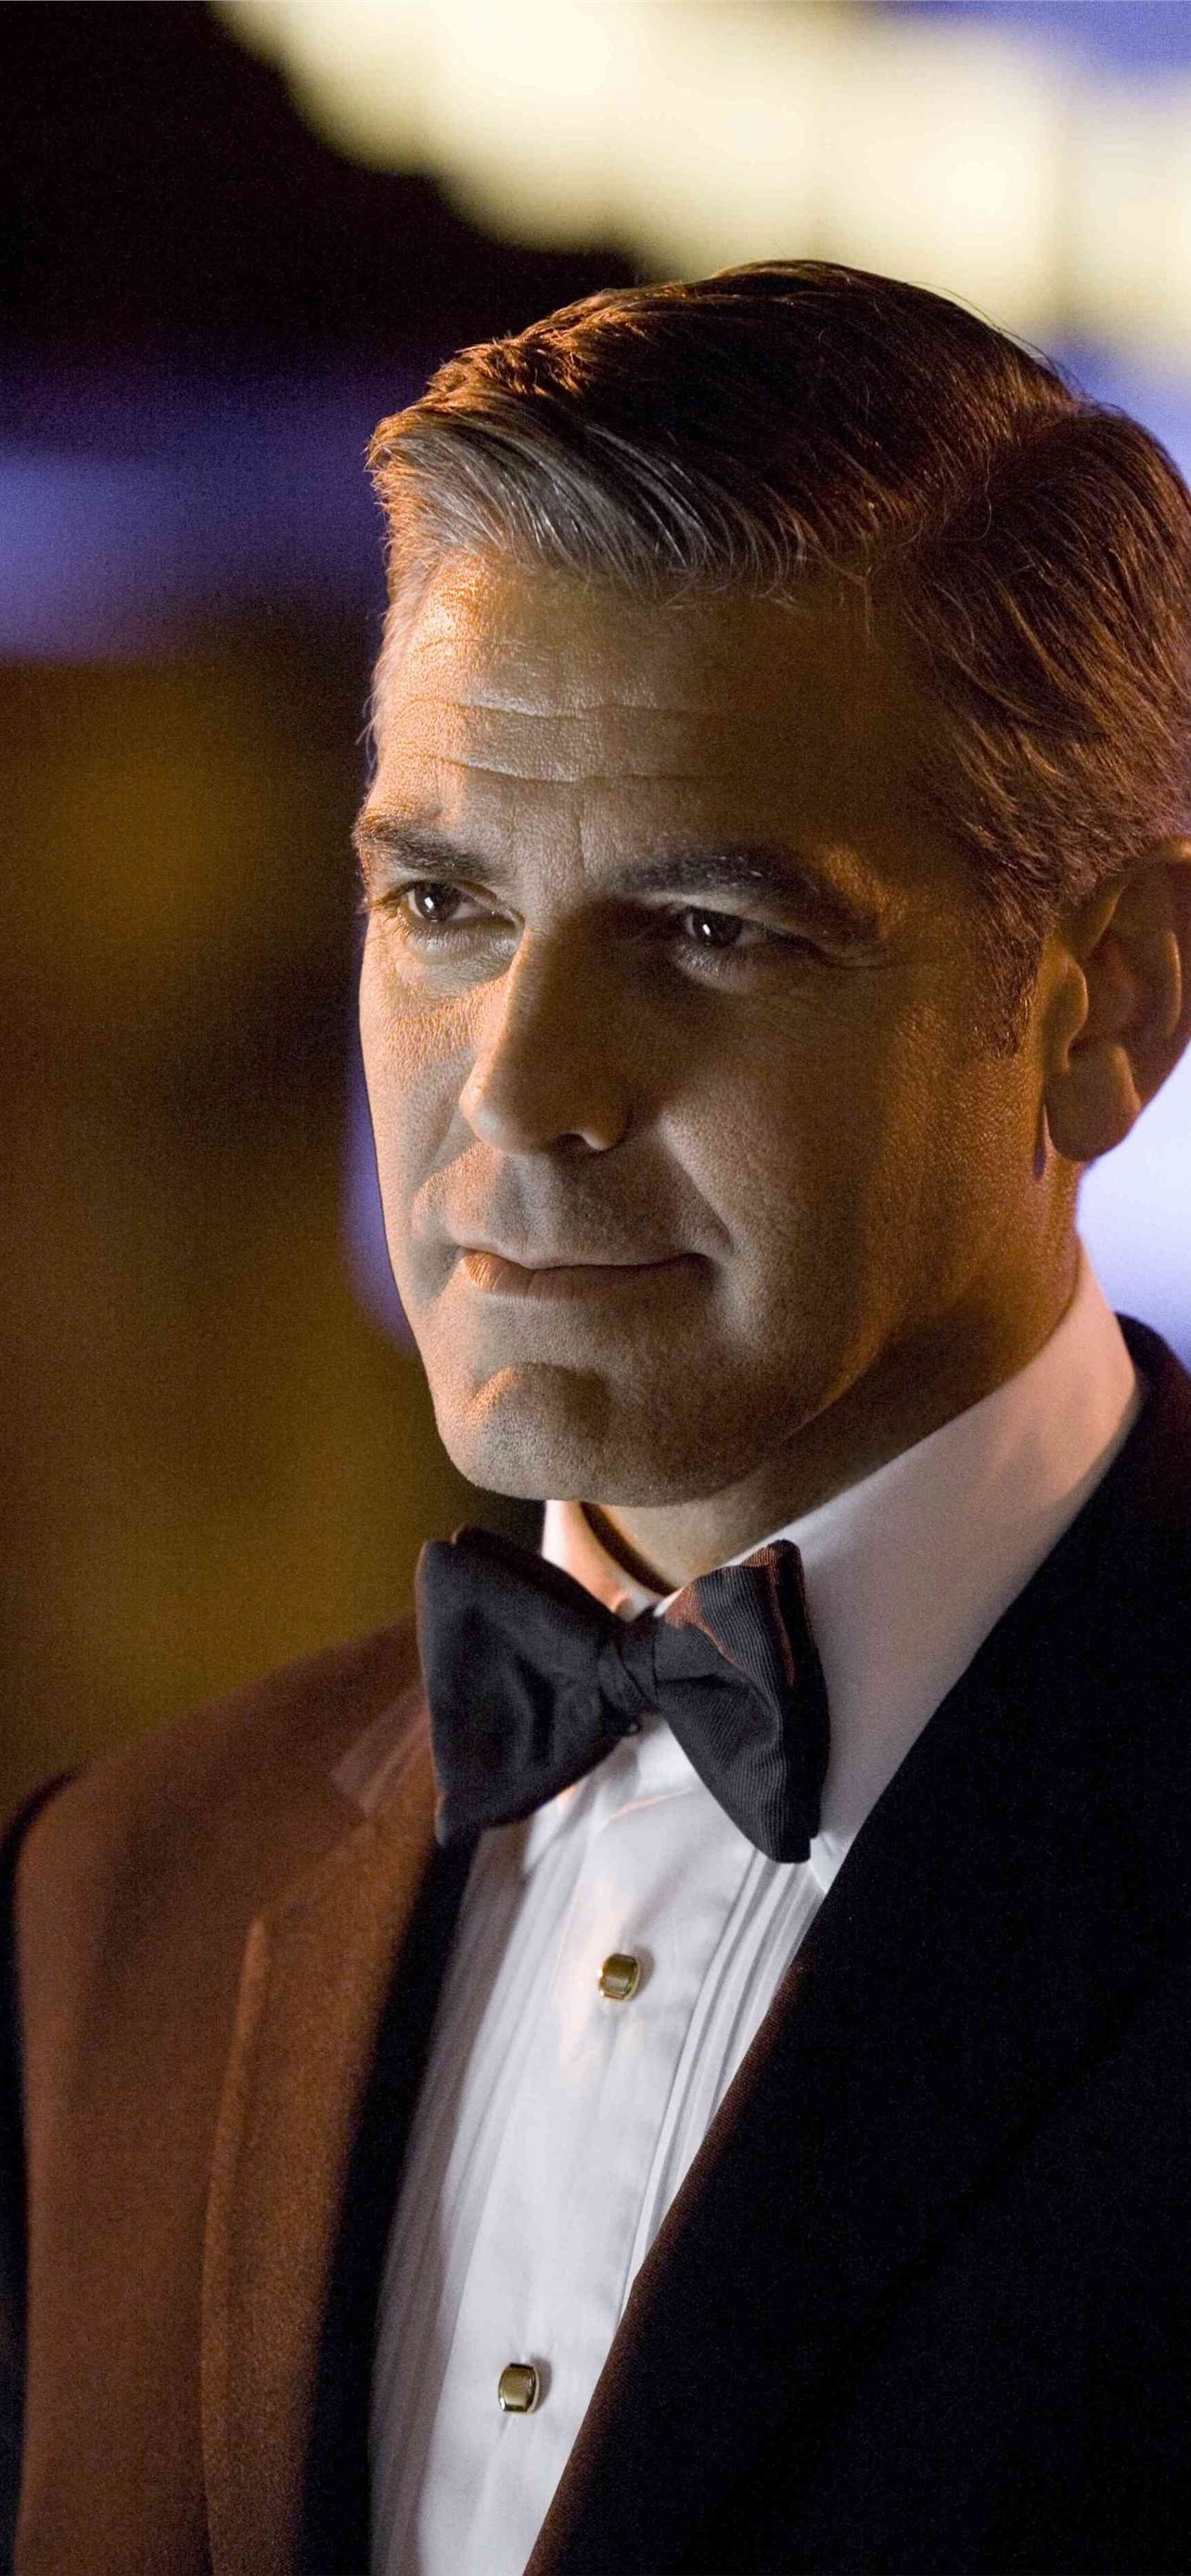 George Clooney, Best iPhone HD wallpapers, Stylish and cool, Home screen, 1290x2780 HD Handy